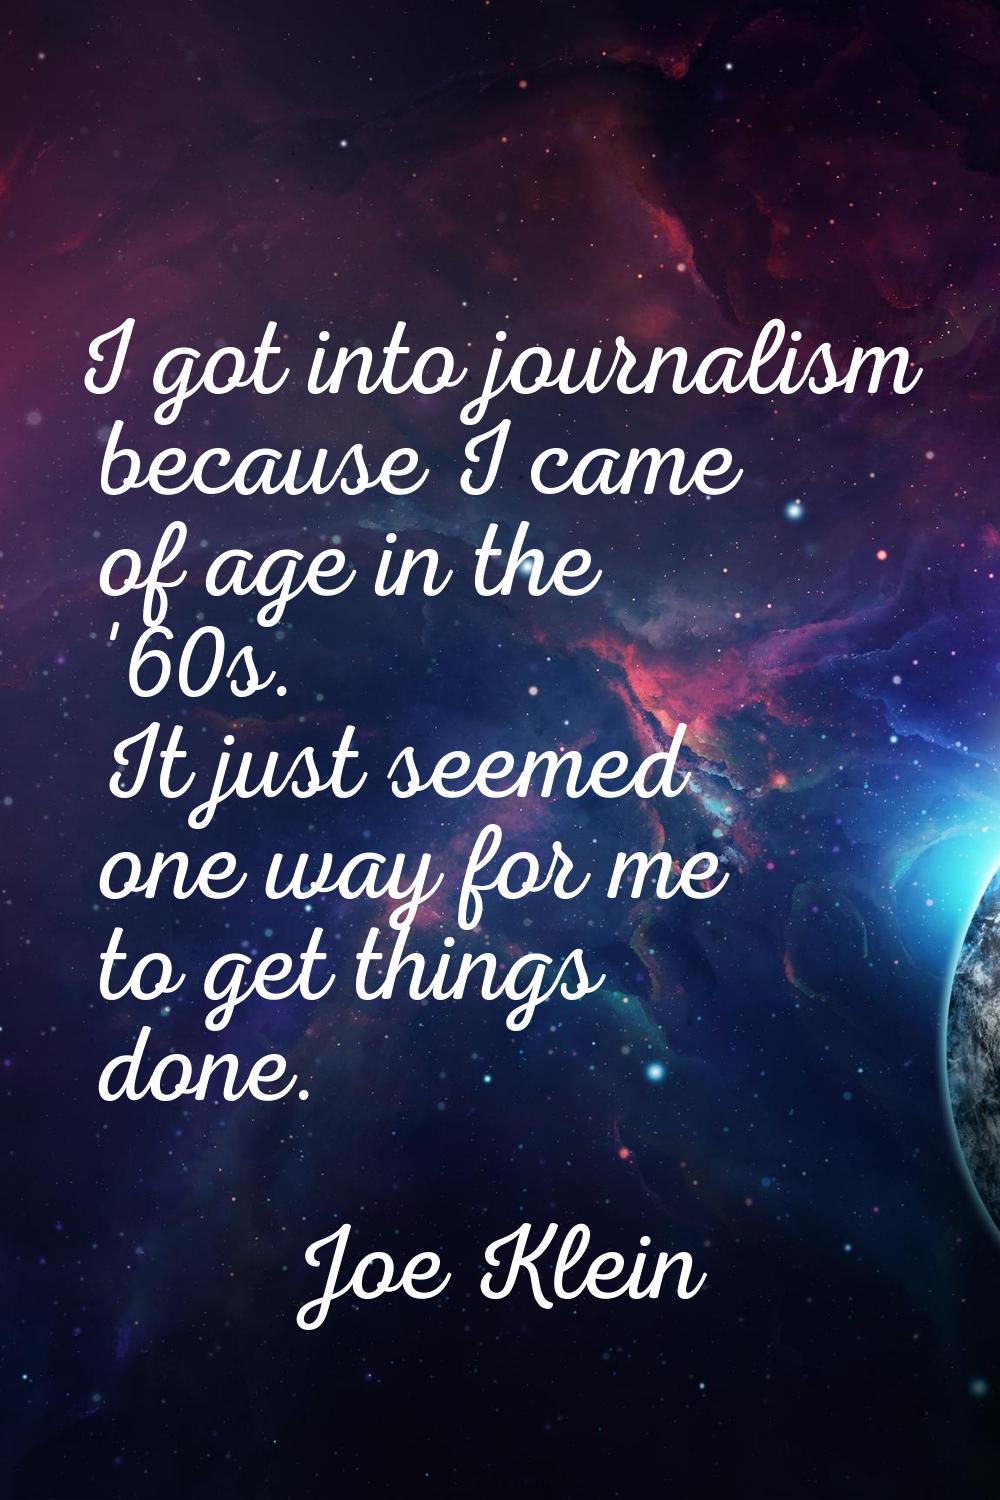 I got into journalism because I came of age in the '60s. It just seemed one way for me to get thing